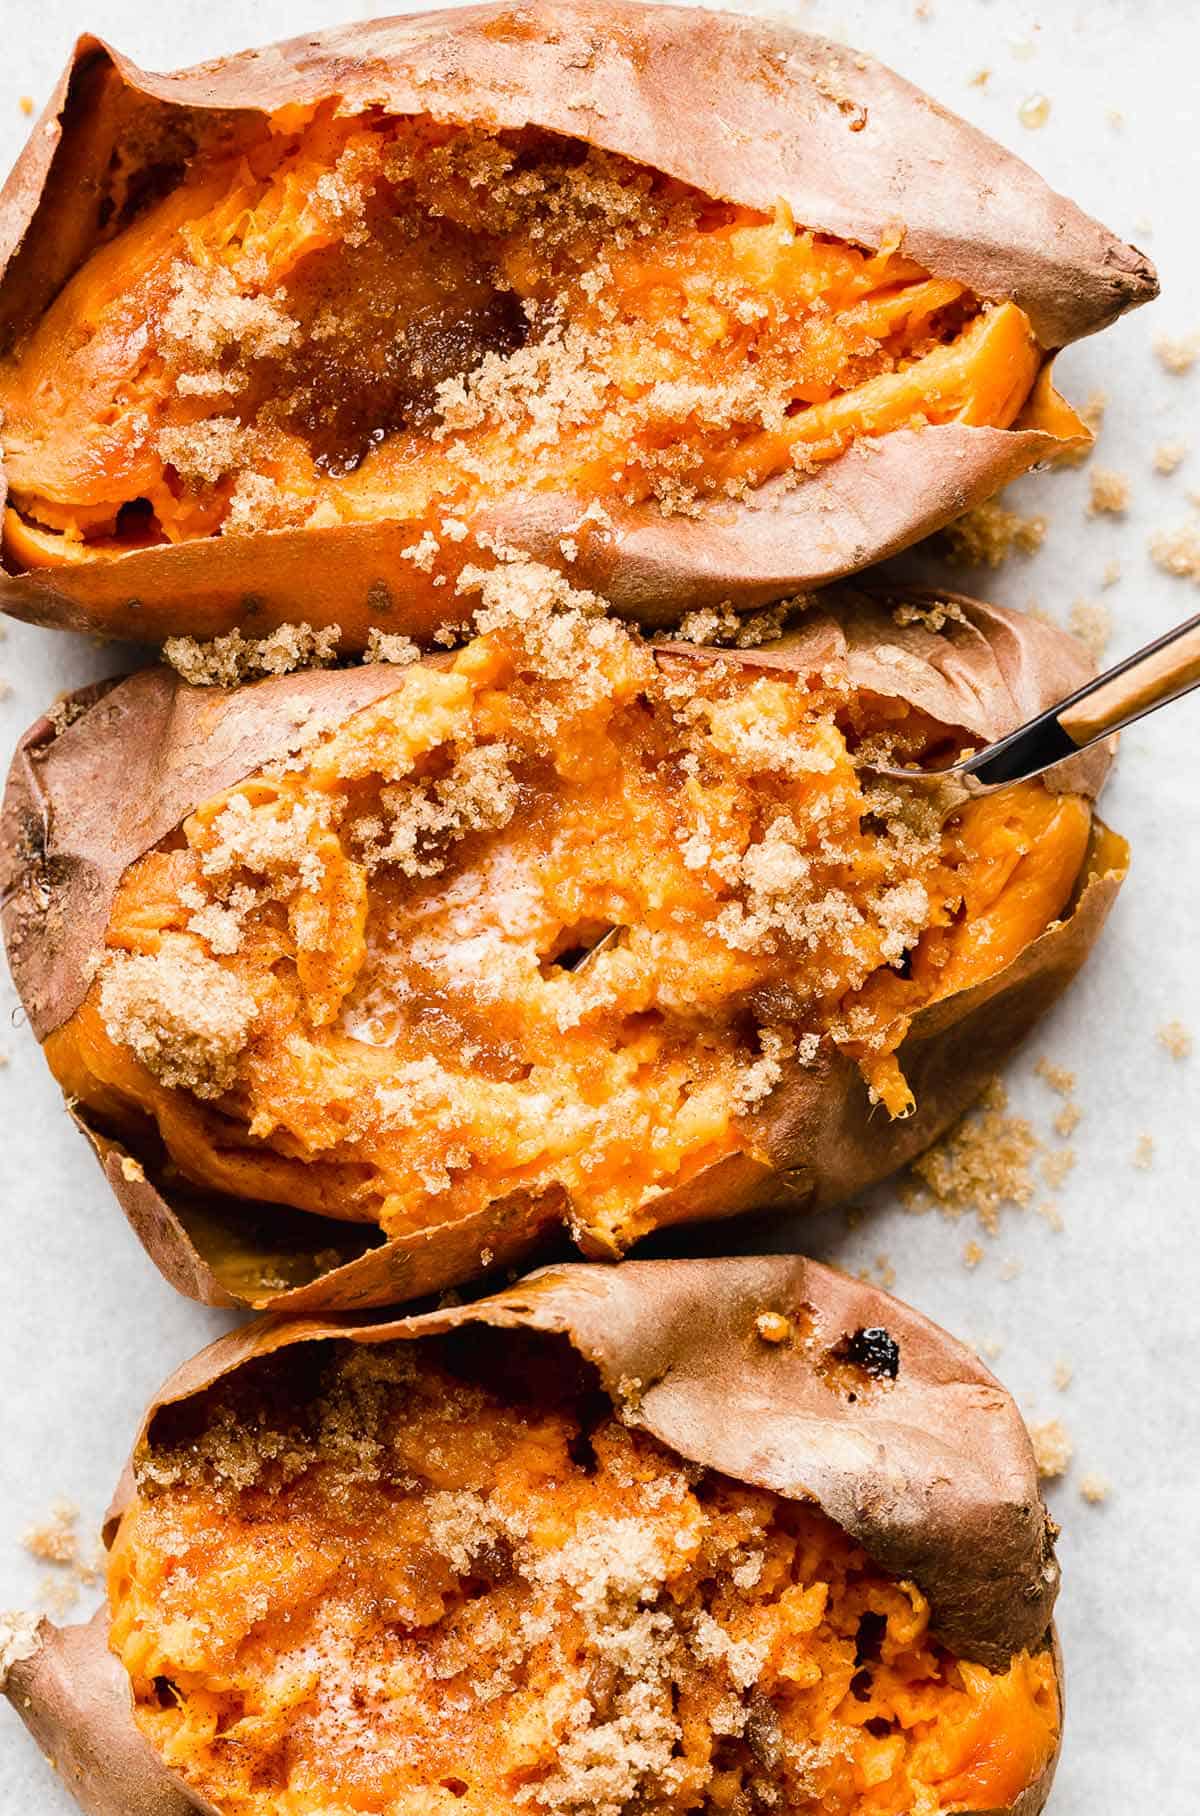 Baked Sweet Potato topped with brown sugar and butter.